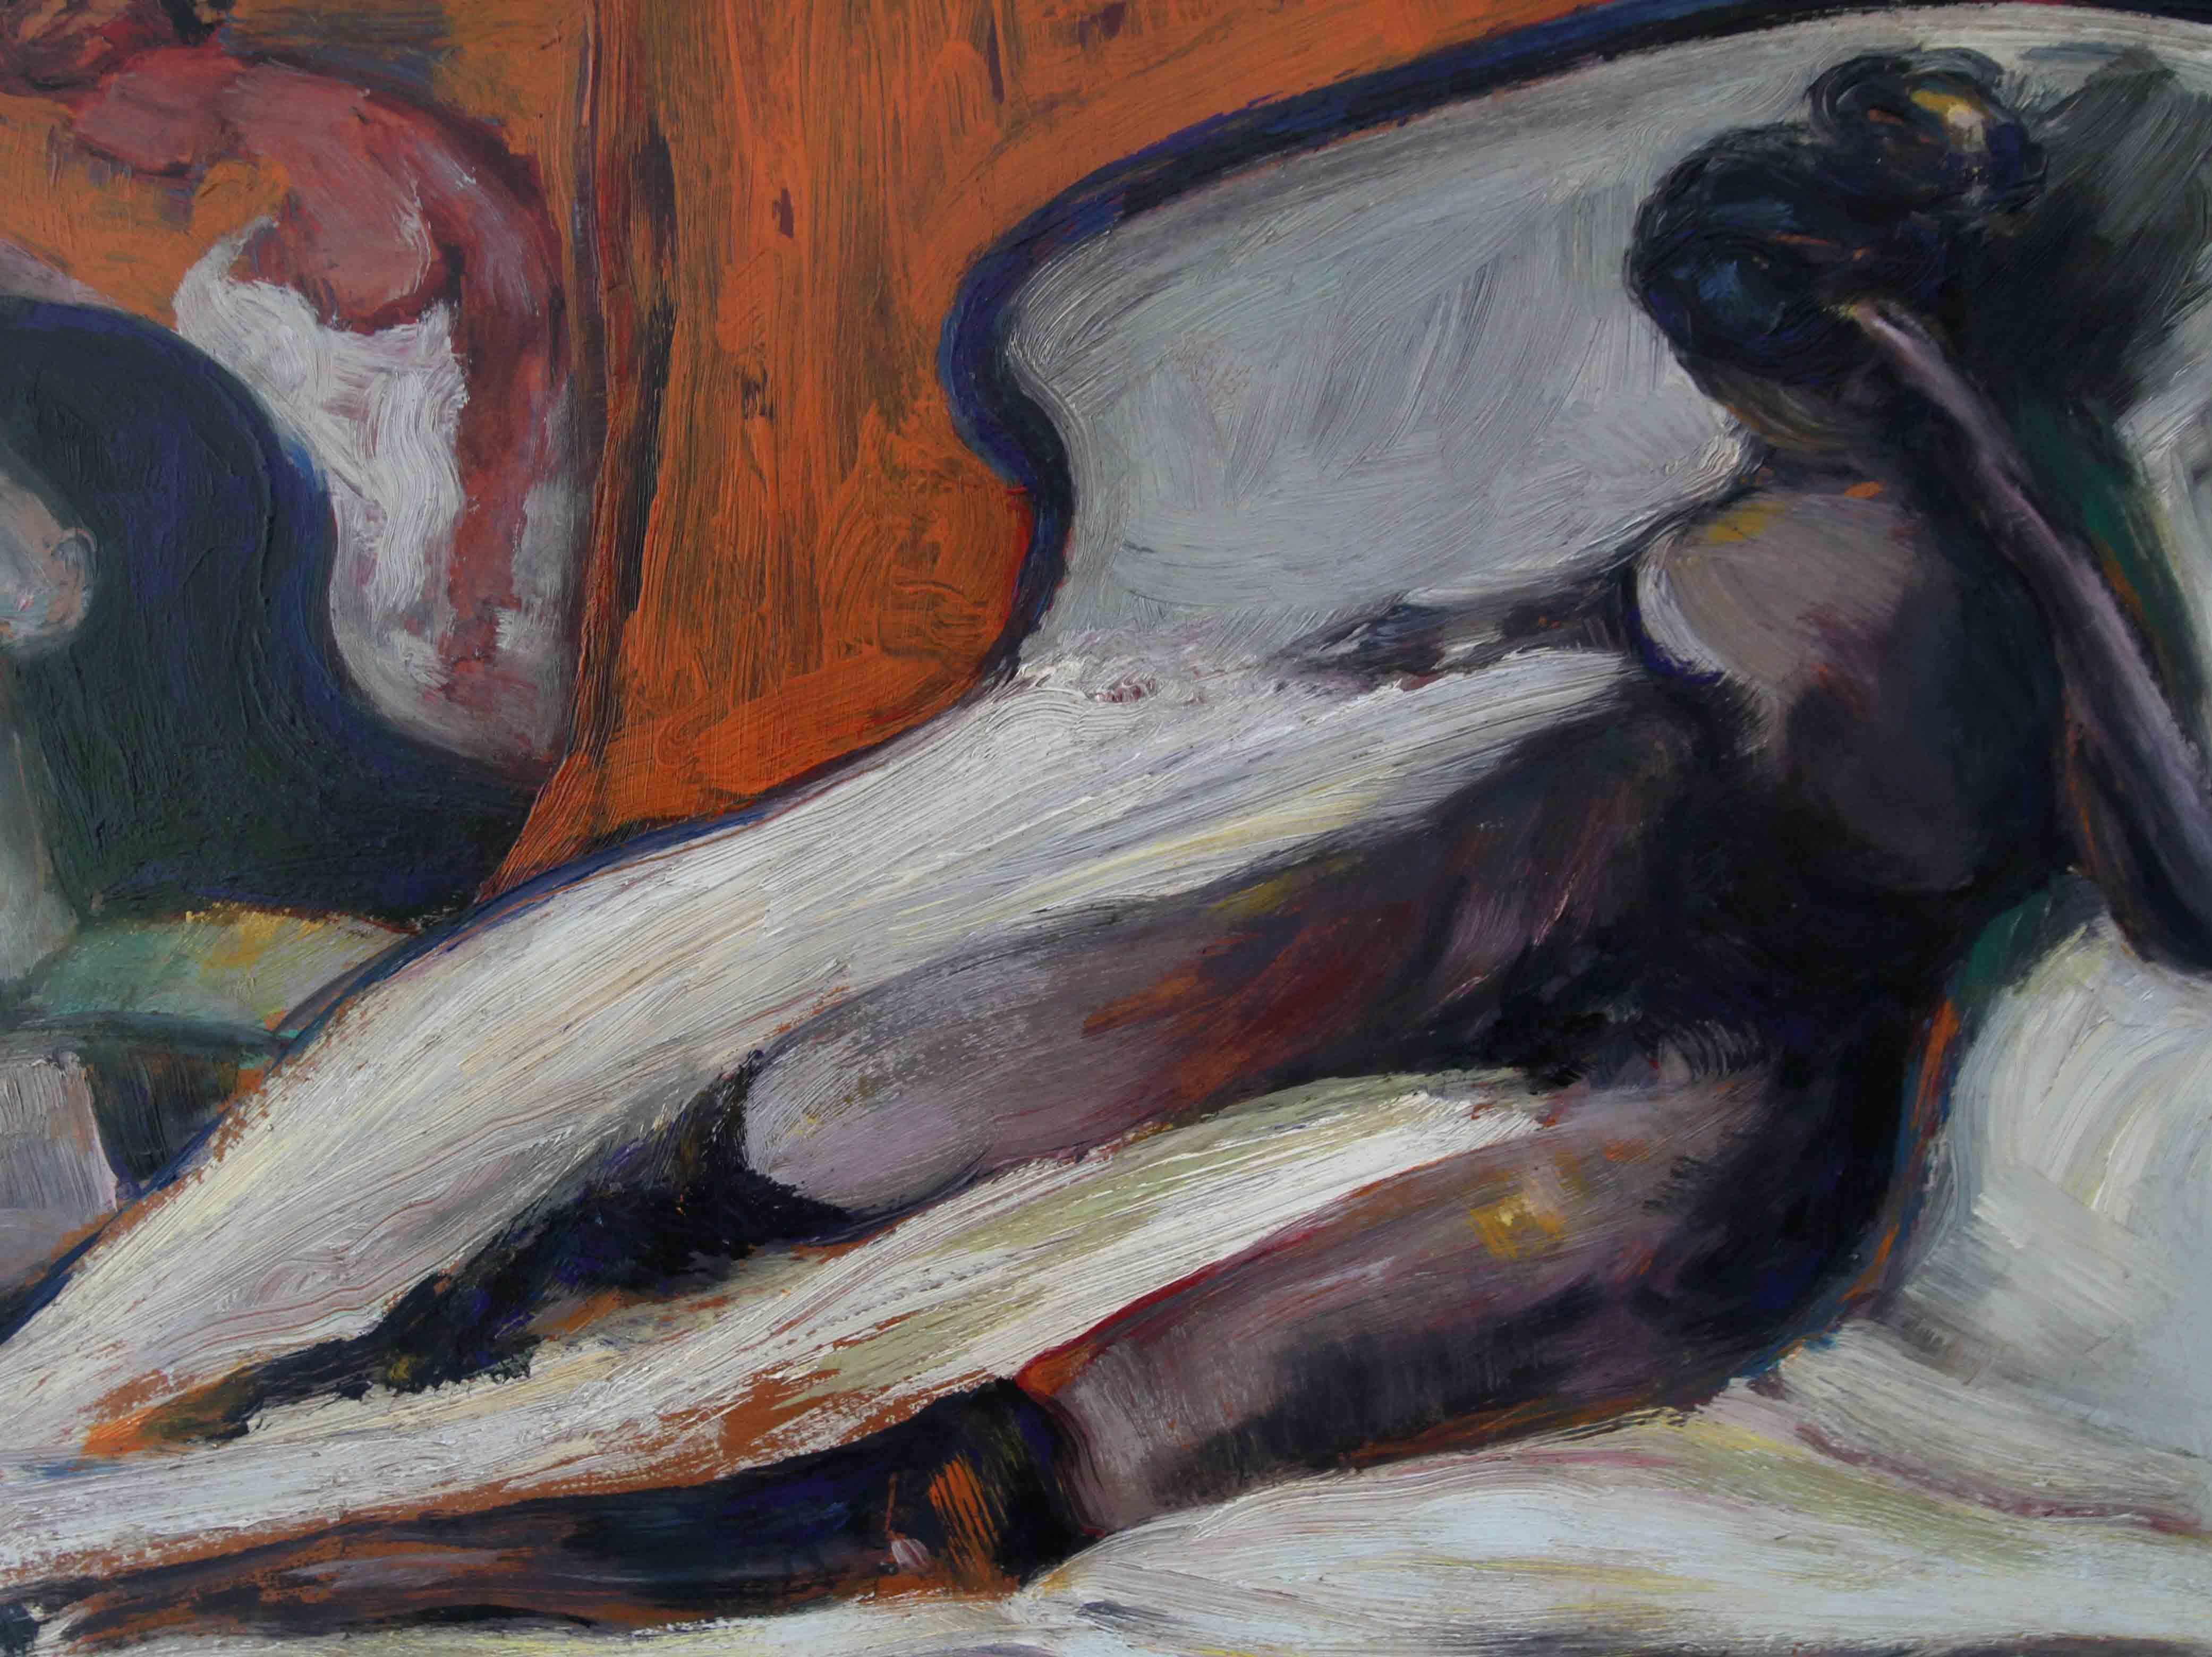 A superb oil on panel nude portrait by the noted Scottish artist Sir Robin Philipson PRSA. A fabulous painting painted circa 1970, the composition three women in various states of undress. One of his best from the Women Observed series with stunning